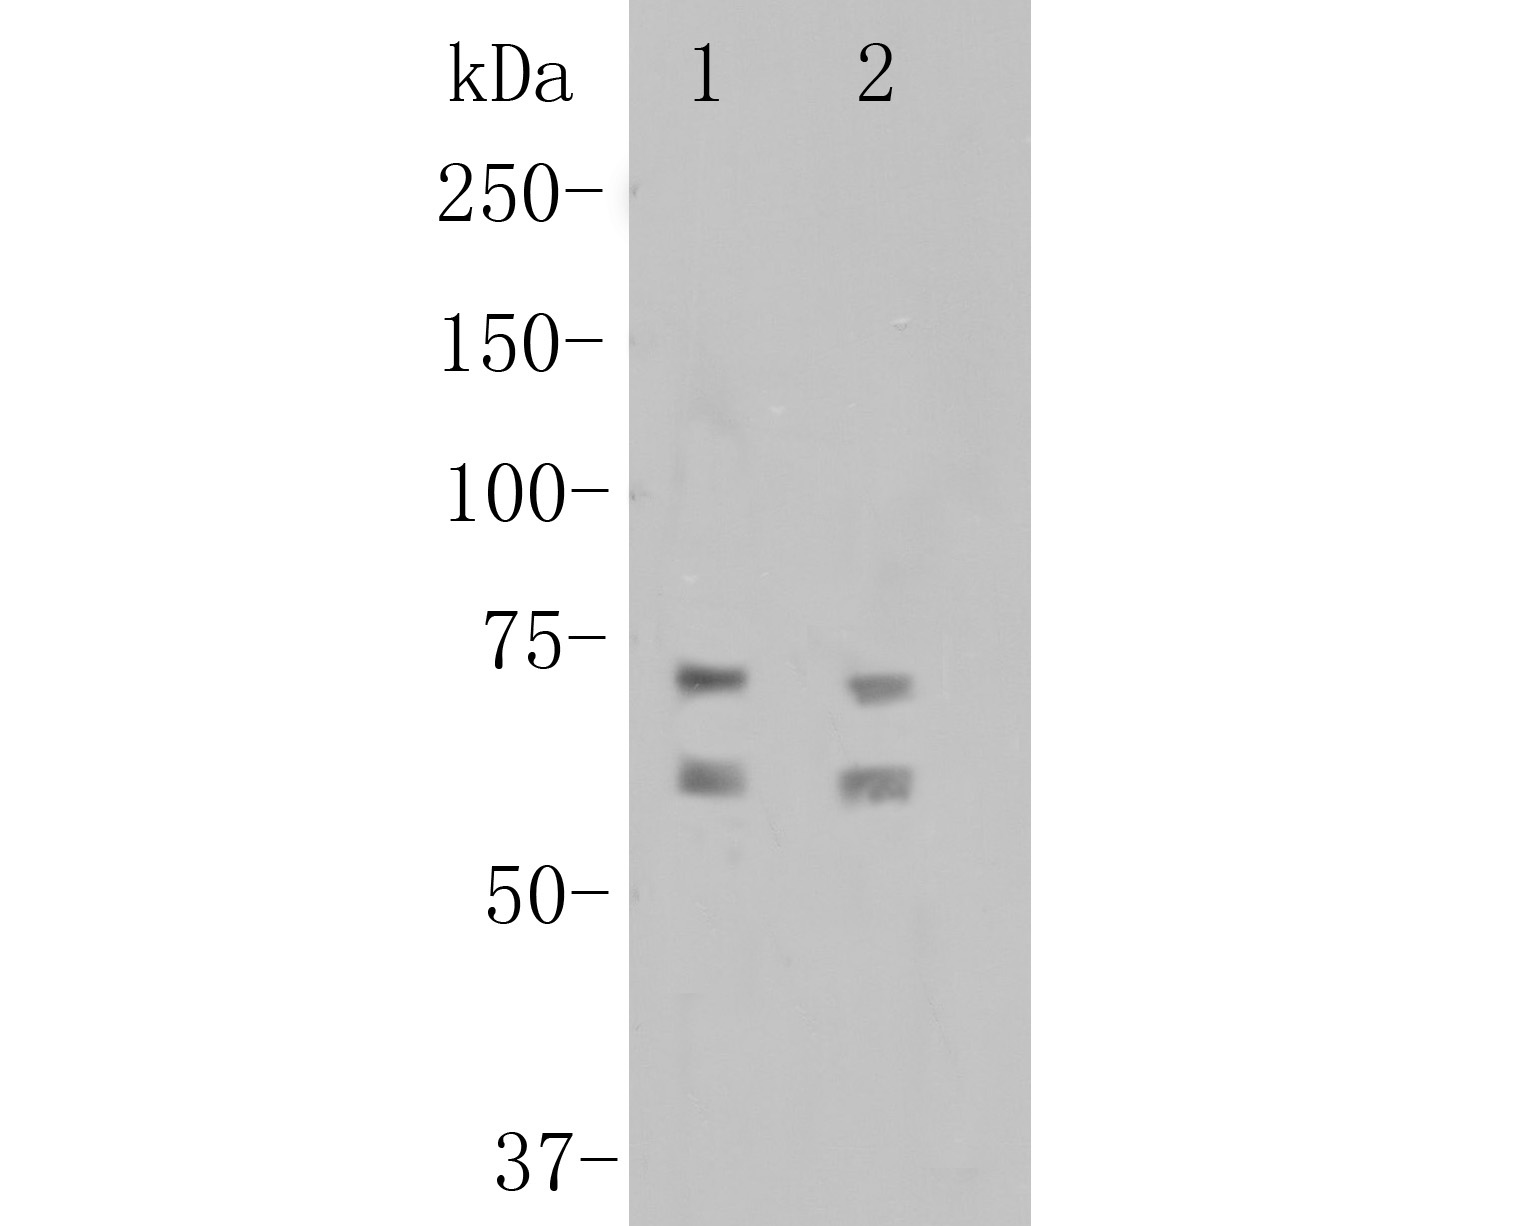 Western blot analysis of CNGA4 on different lysates. Proteins were transferred to a PVDF membrane and blocked with 5% BSA in PBS for 1 hour at room temperature. The primary antibody (ER1901-88, 1/500) was used in 5% BSA at room temperature for 2 hours. Goat Anti-Rabbit IgG - HRP Secondary Antibody (HA1001) at 1:5,000 dilution was used for 1 hour at room temperature.<br />
Positive control: <br />
Lane 1: A549 cell lysate<br />
Lane 2: A431 cell lysate